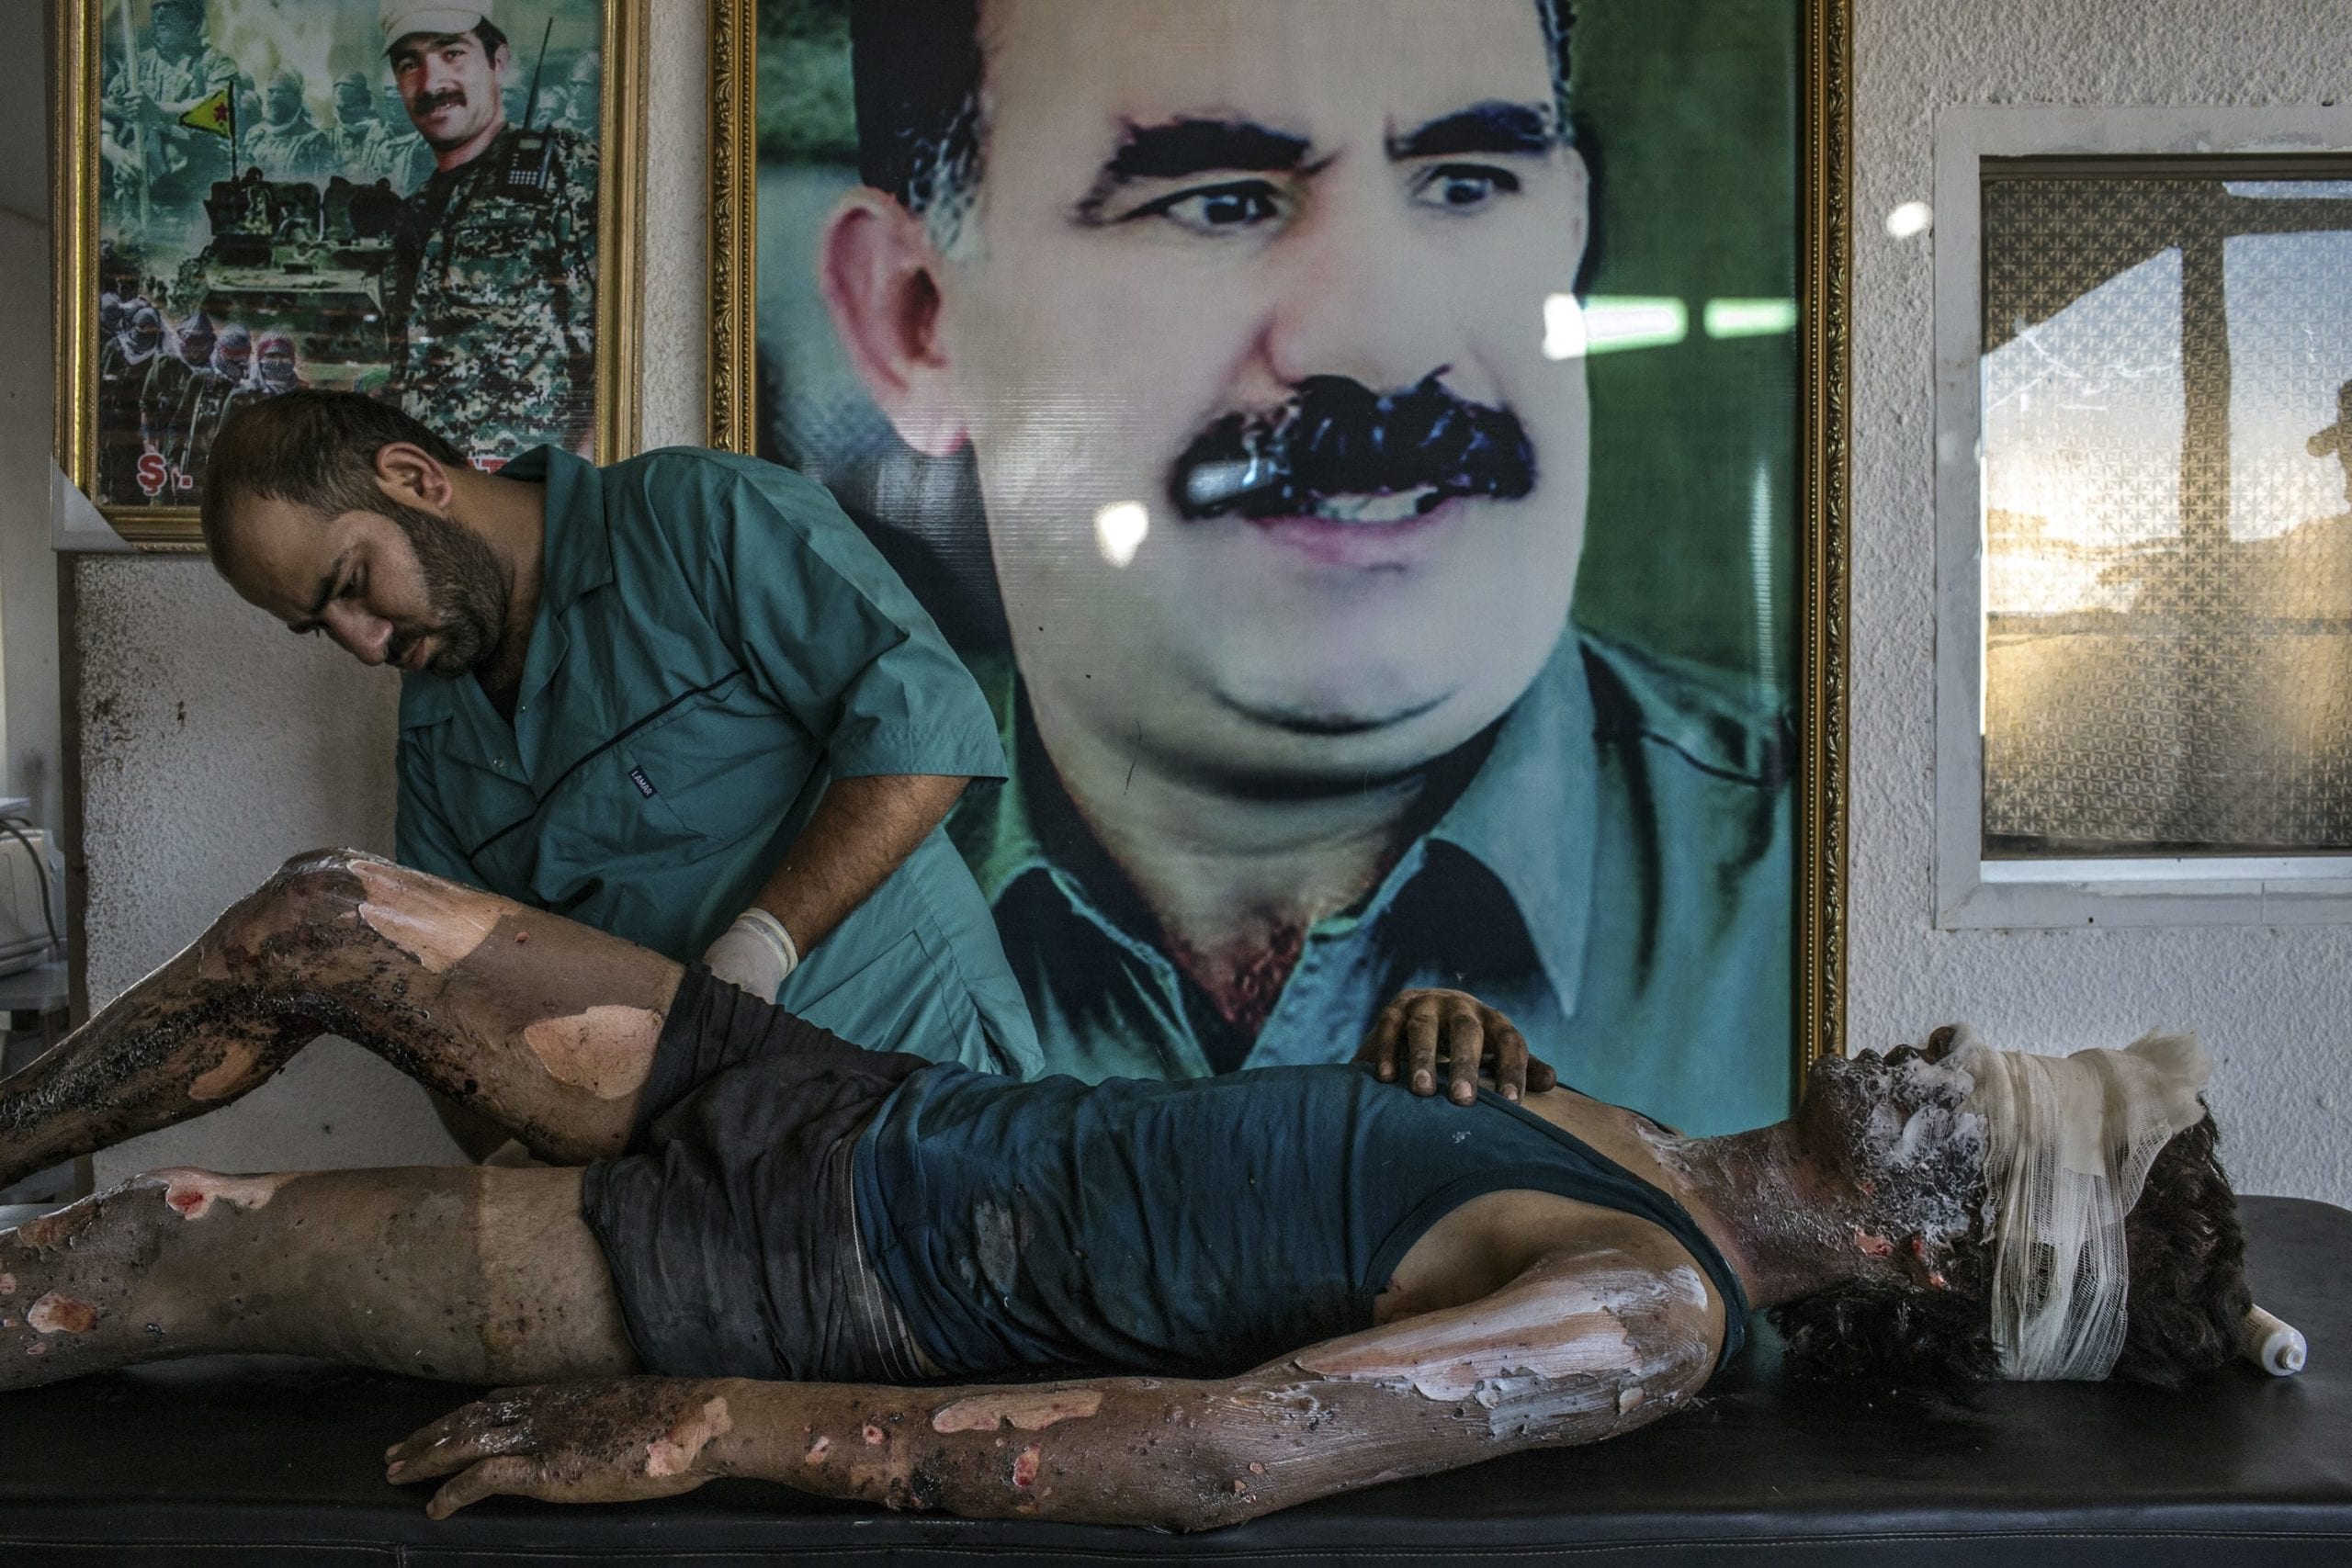 Hasaka, Syria - August 1, 2015. A doctor rubs ointment on the burns of Jacob, 16, in front of a poster of Abdullah Ocalan, center, the jailed leader of the Kurdistan Workers' Party, at a YPG hospital compound on the outskirts of Hasaka. According to YPG fighters at the scene, Jacob is an ISIS fighter from Deir al-Zour and the only survivior from an ambush made by YPG fighters over a truck alleged to carry ISIS fighters on the outskirts of Hasaka. Six ISIS fighters died in the attack, 5 of them completely disfigured by the explosion (c) Mauricio Lima for The New York Times